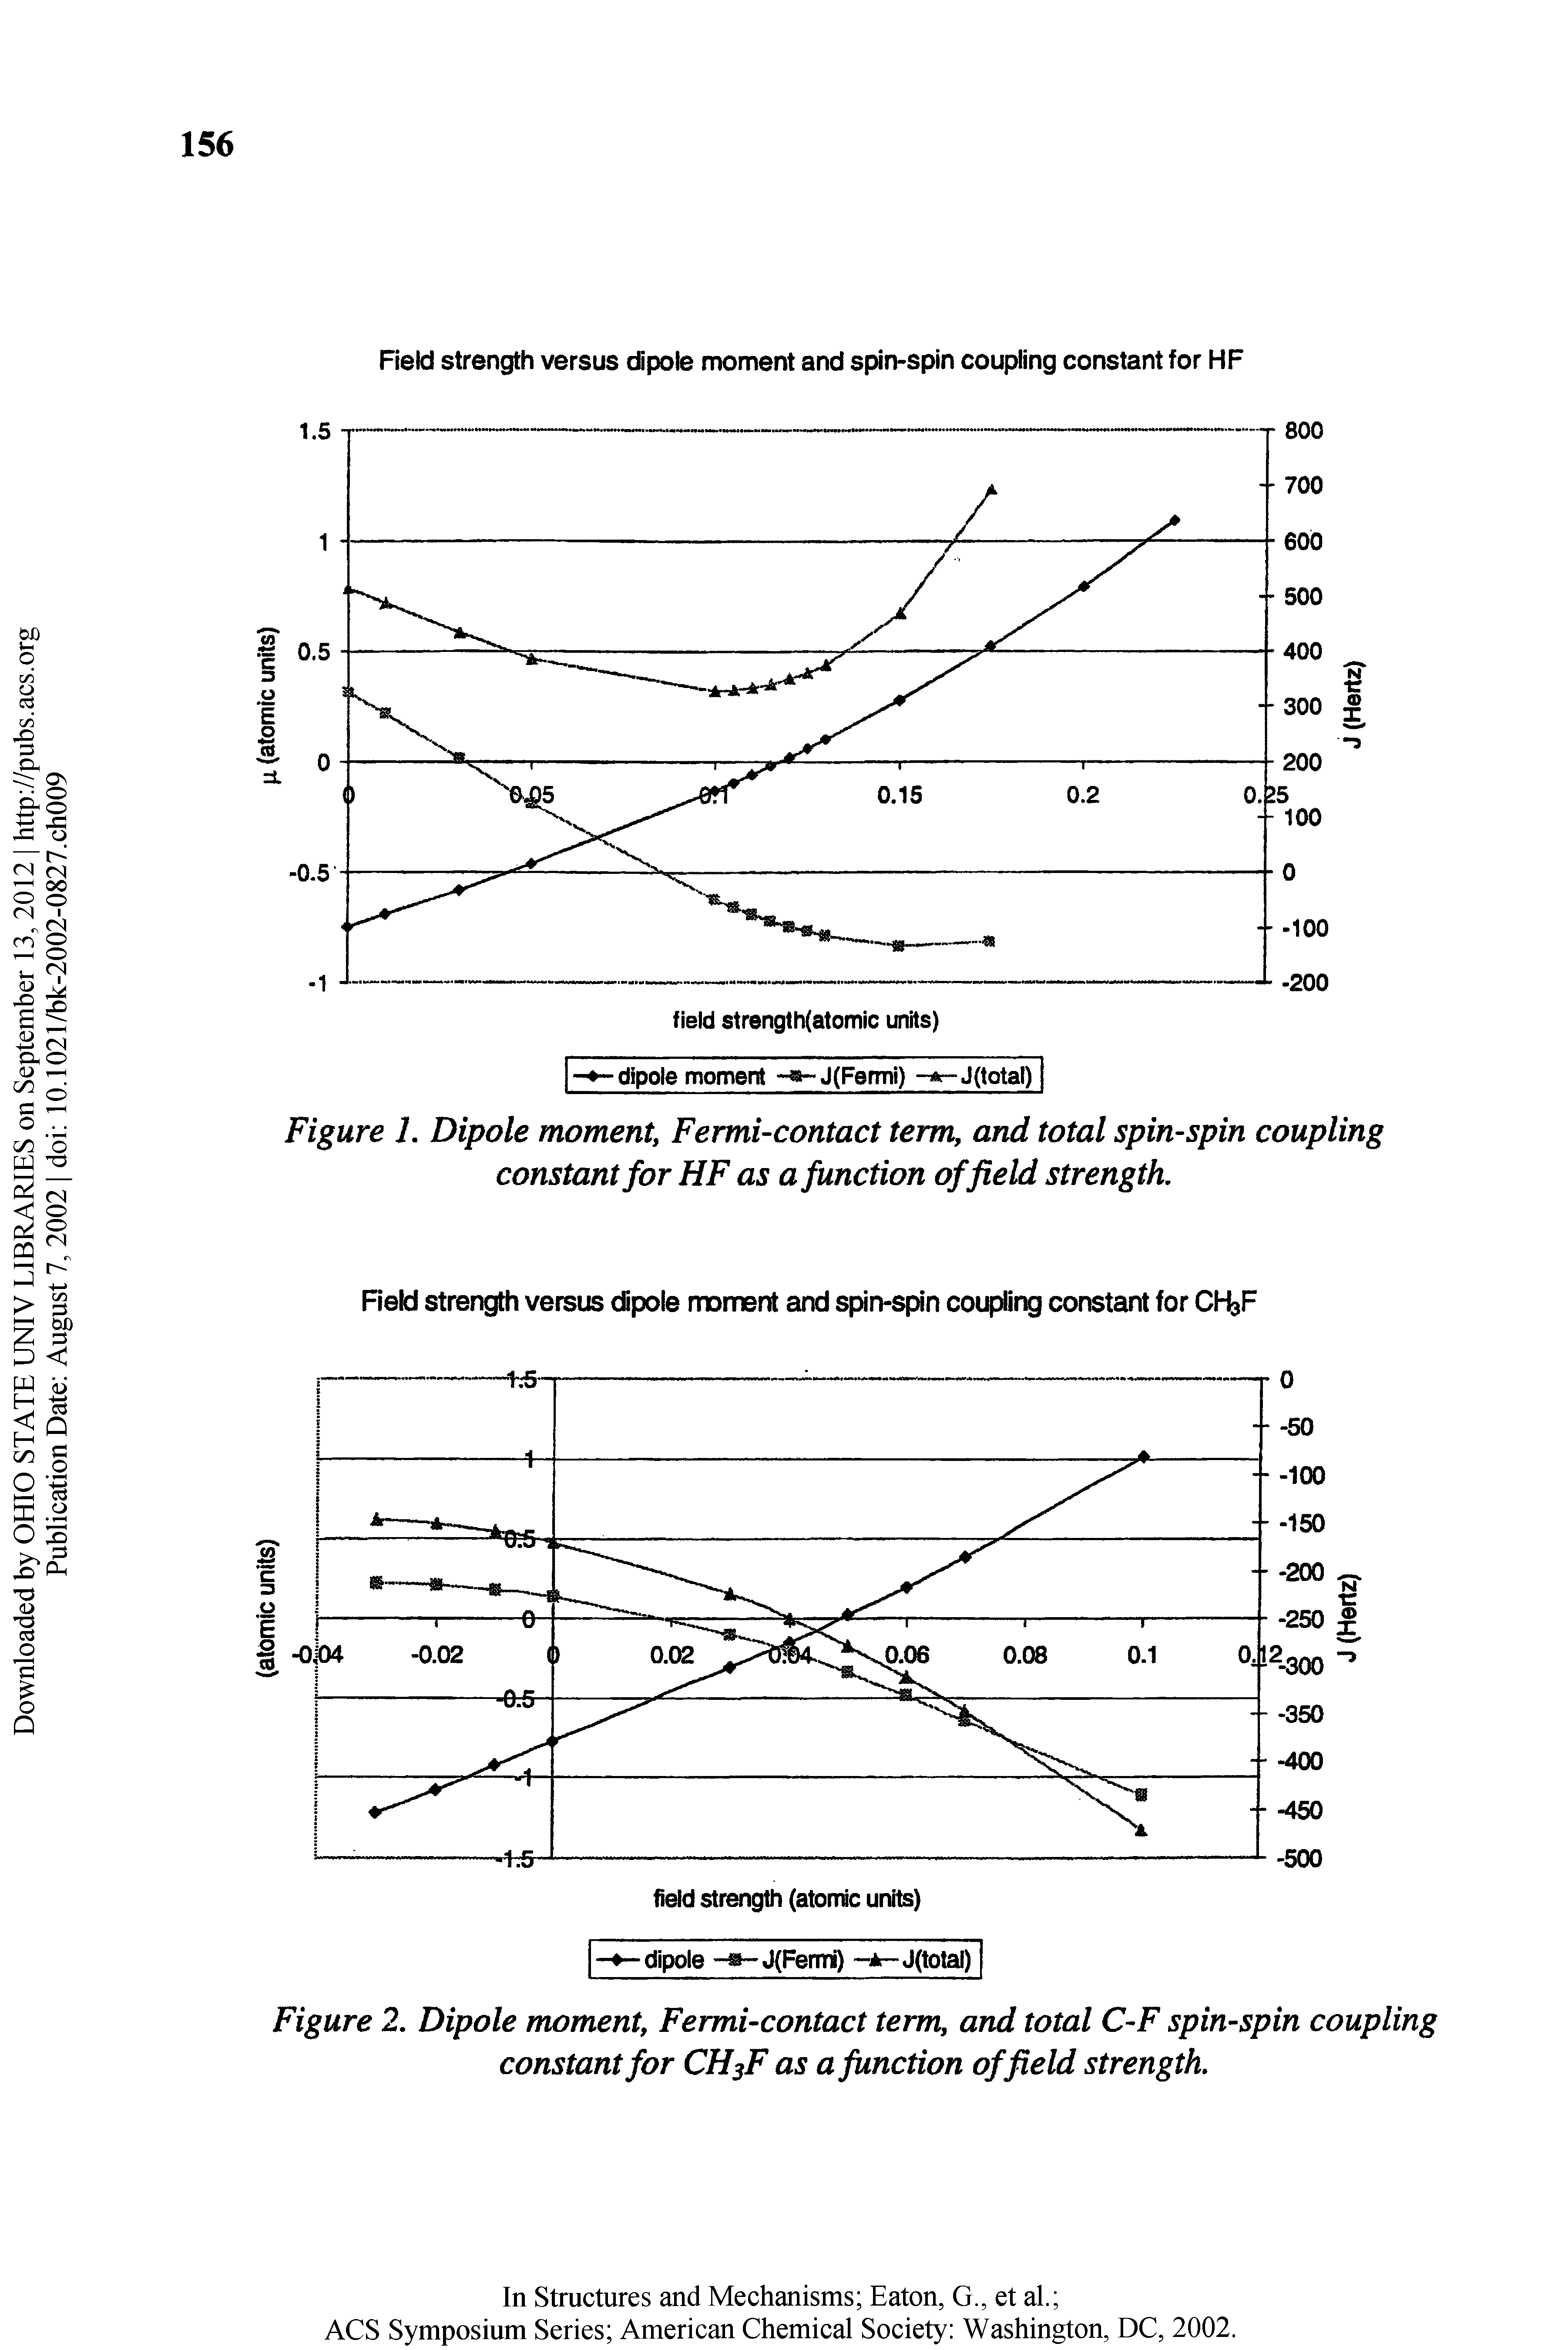 Figure L Dipole moment, Fermi-contact term, and total spin-spin coupling constant for HF as a function of field strength.